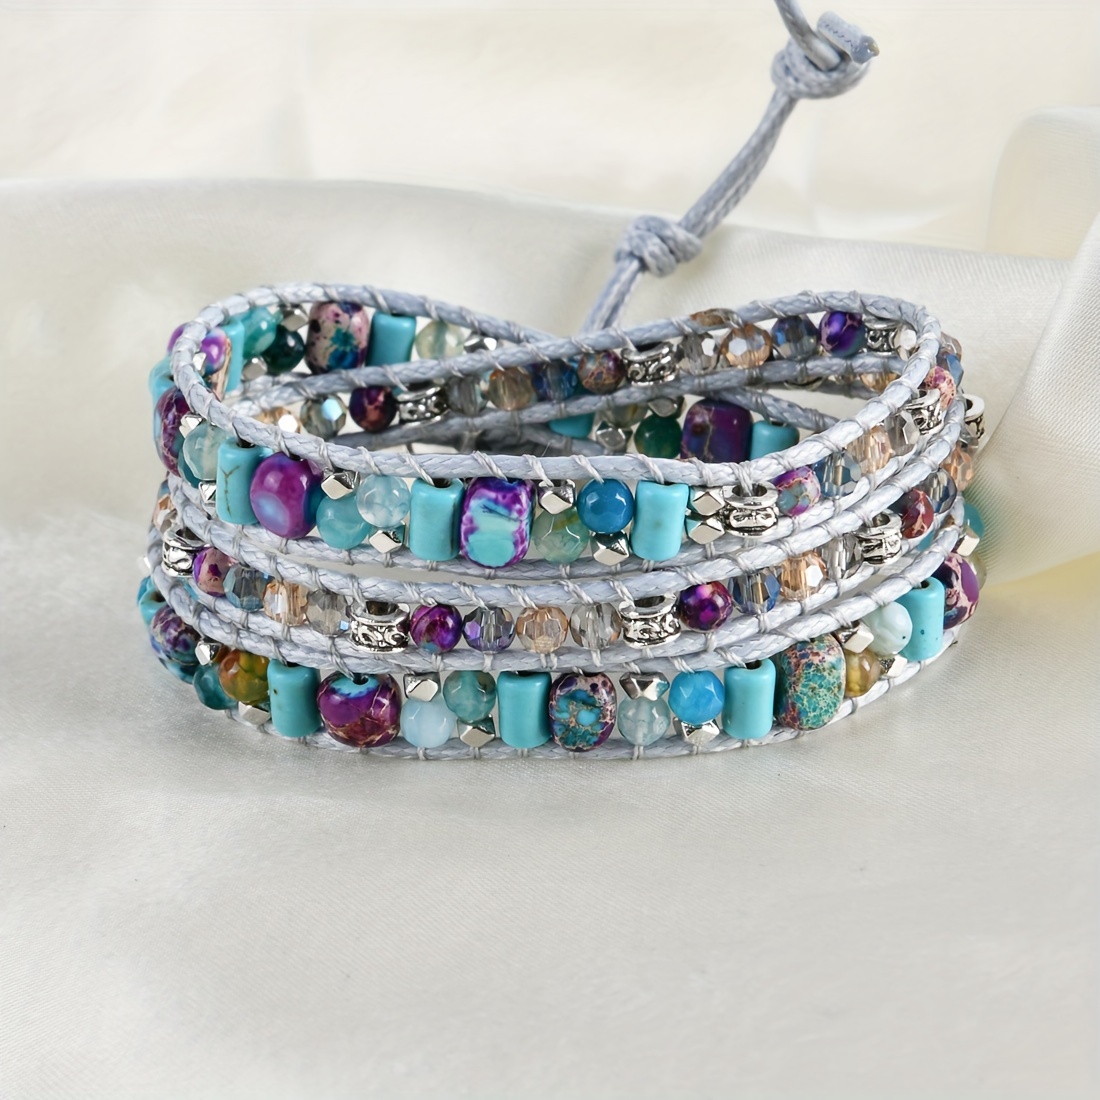 

Bracelet with multiple layers adorned with colorful stones, in a bohemian and ethnic style, handcrafted for women.